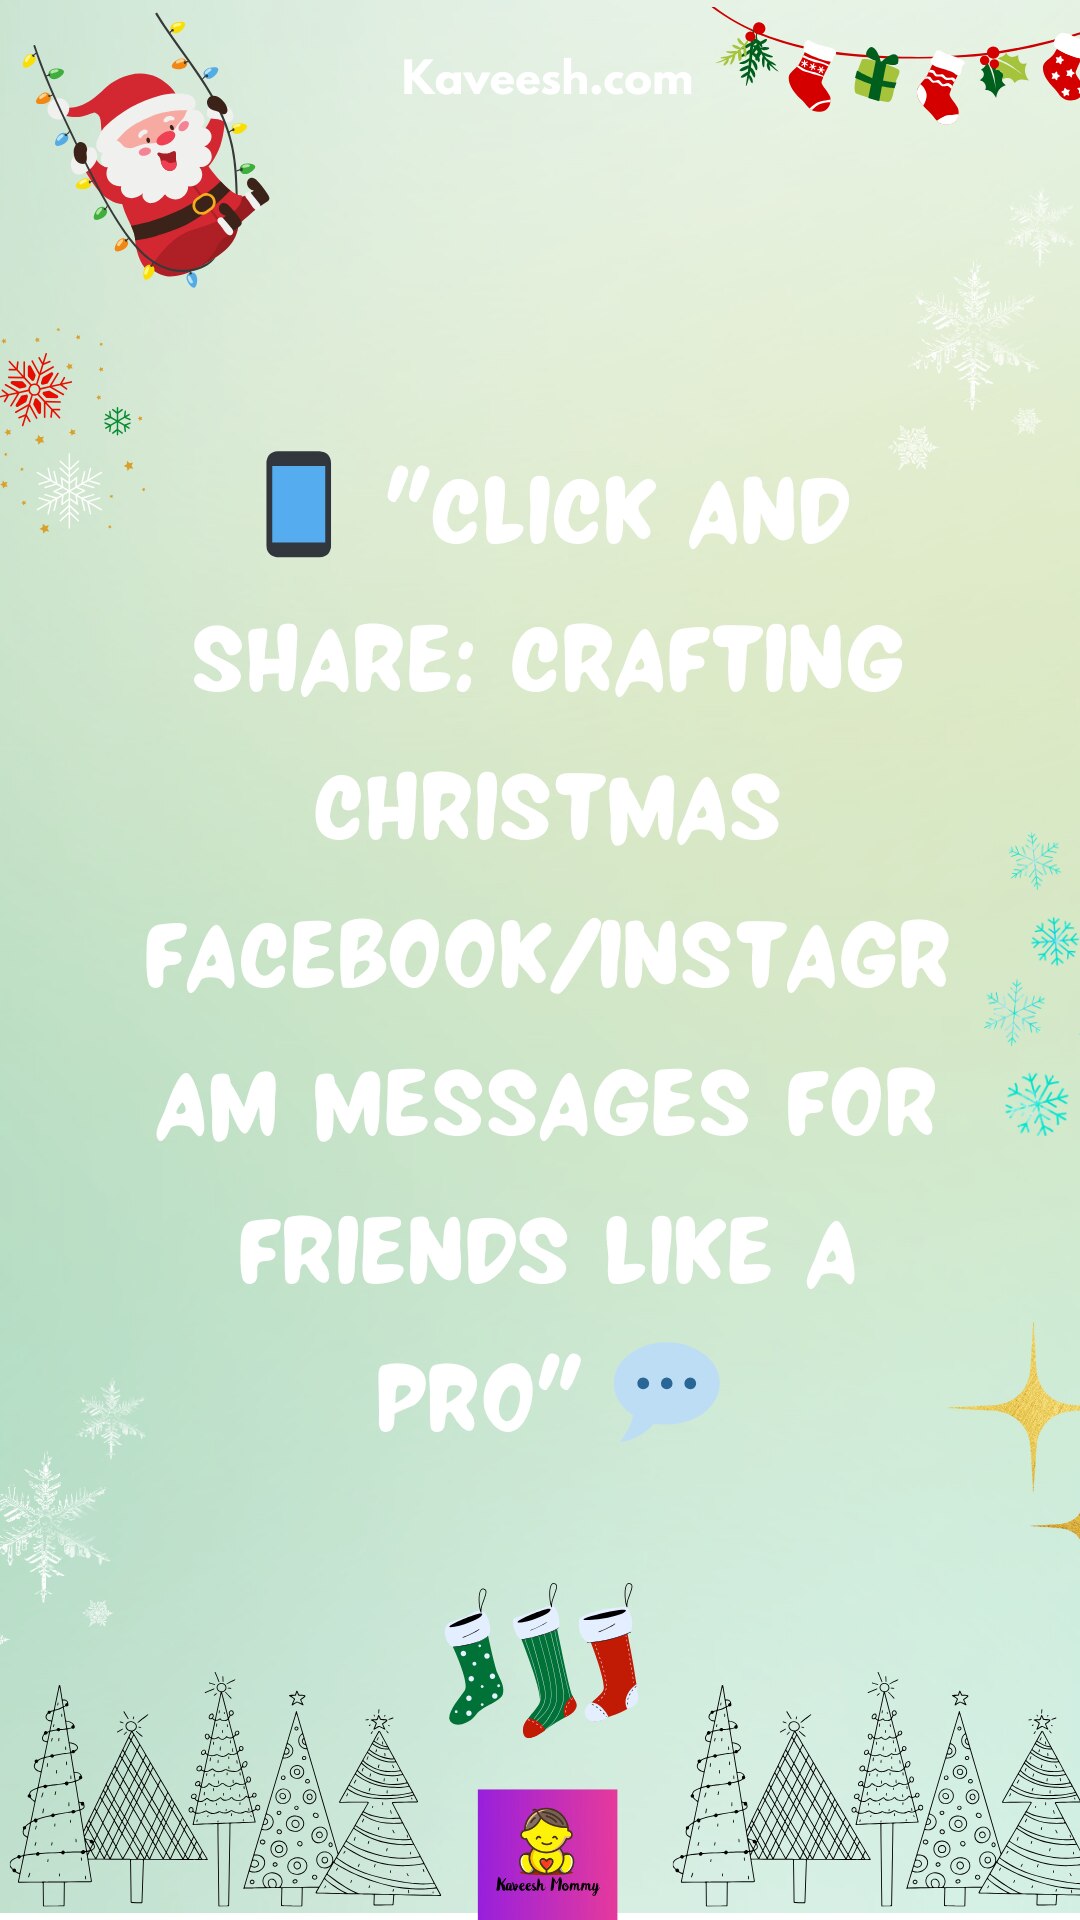 List of Christmas Social media messages for friends